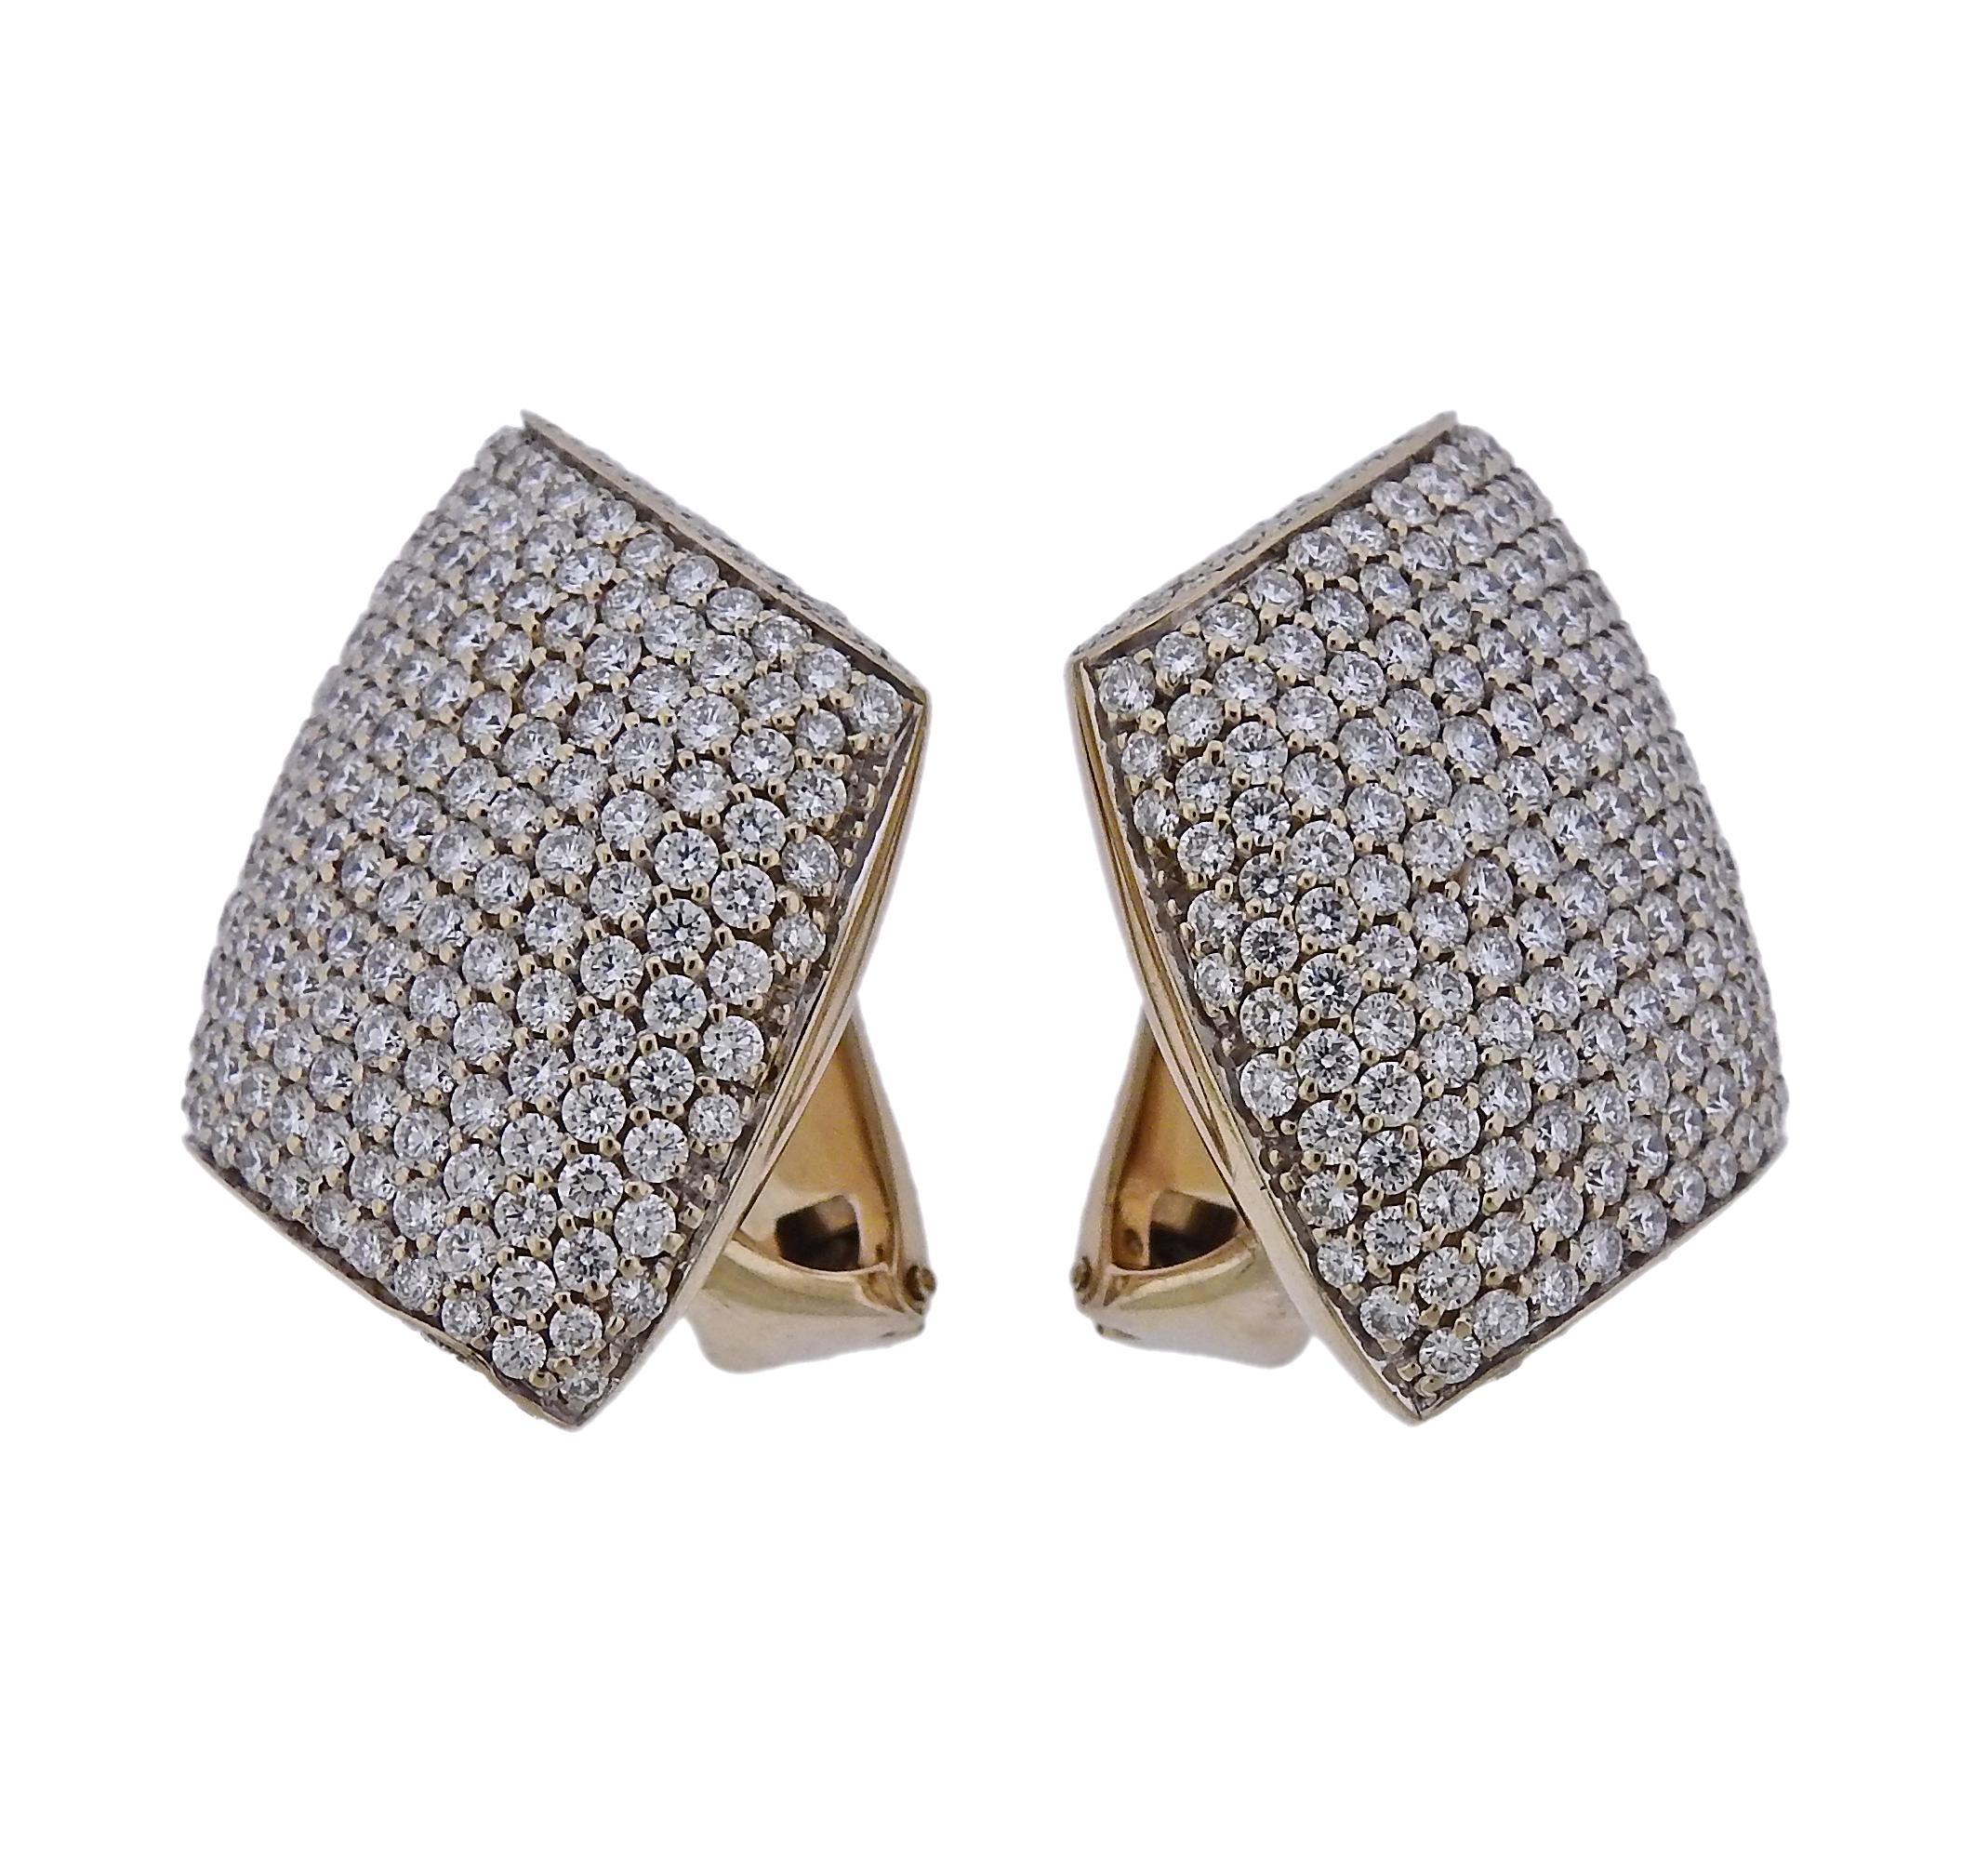 Pair of impressive Plateau earrings, set in 18k gold with a total of 6.42ctw in G/VS diamonds, crafted by Vhernier. Earrings are 29mm x 22mm, weigh 33.8 grams. Marked: Vhernier, 3229AL, 750, 22B.